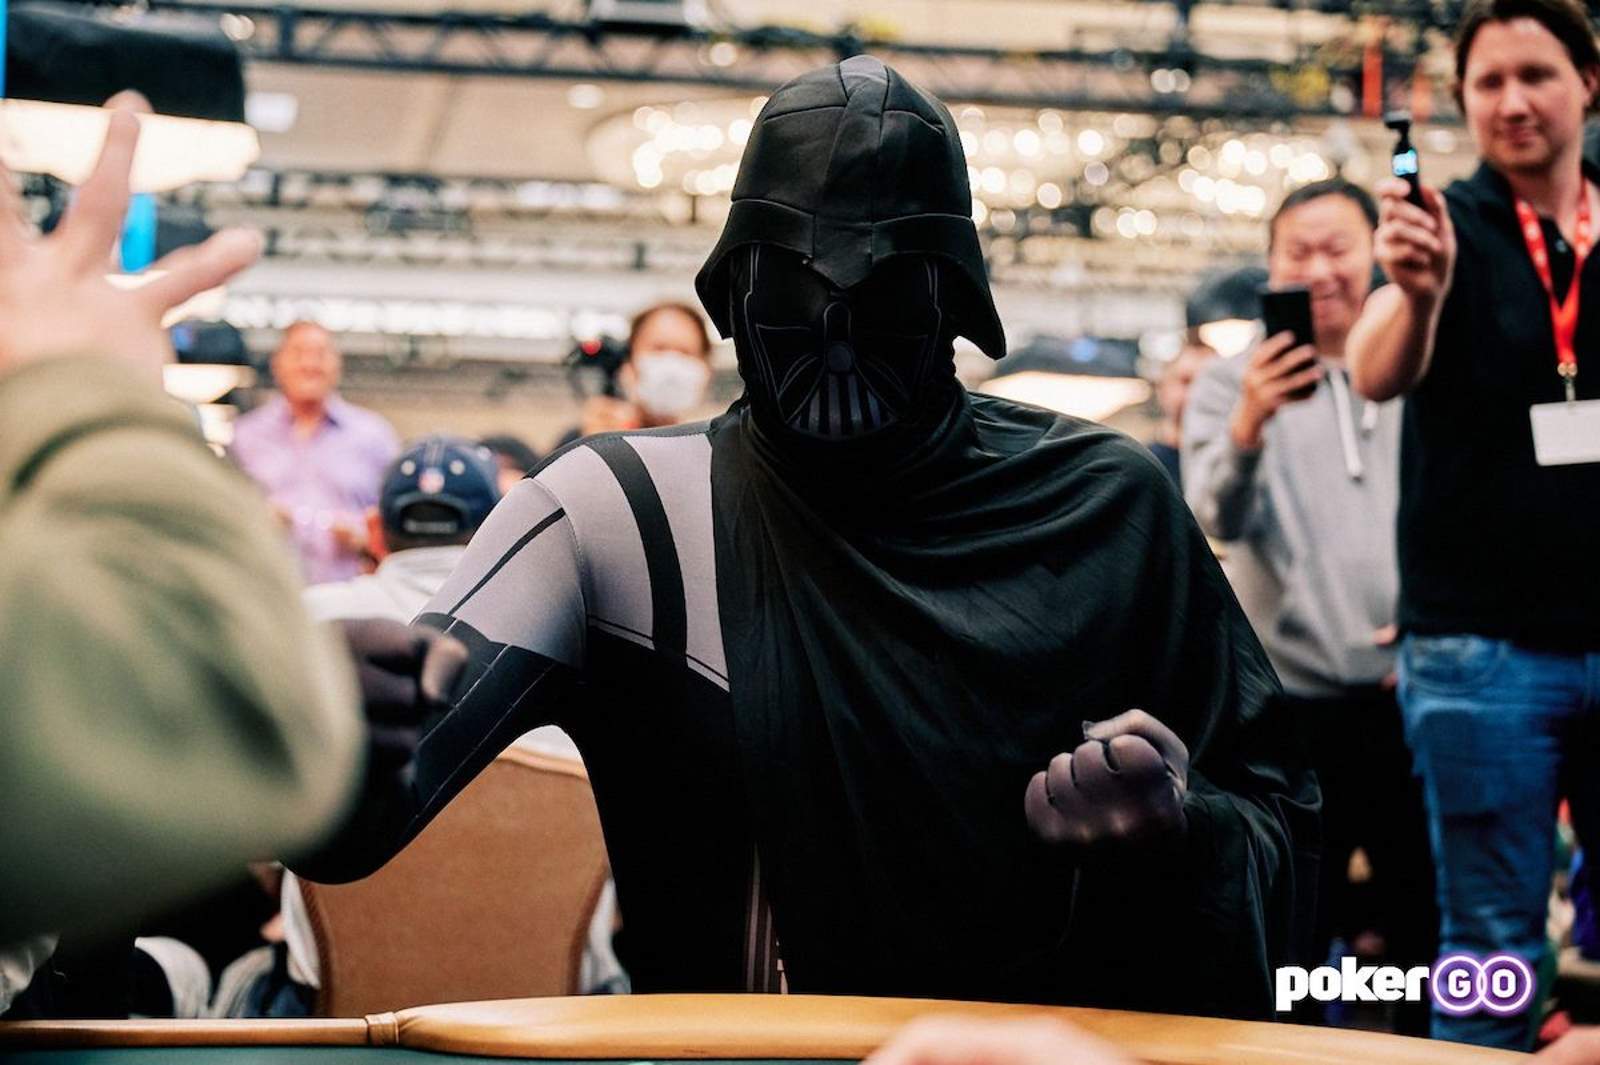 WSOP Day 38 Recap: Hellmuth Lasts One Hour of Main Event after Darth Vader Entrance as Packed Day 2abc Plays Out